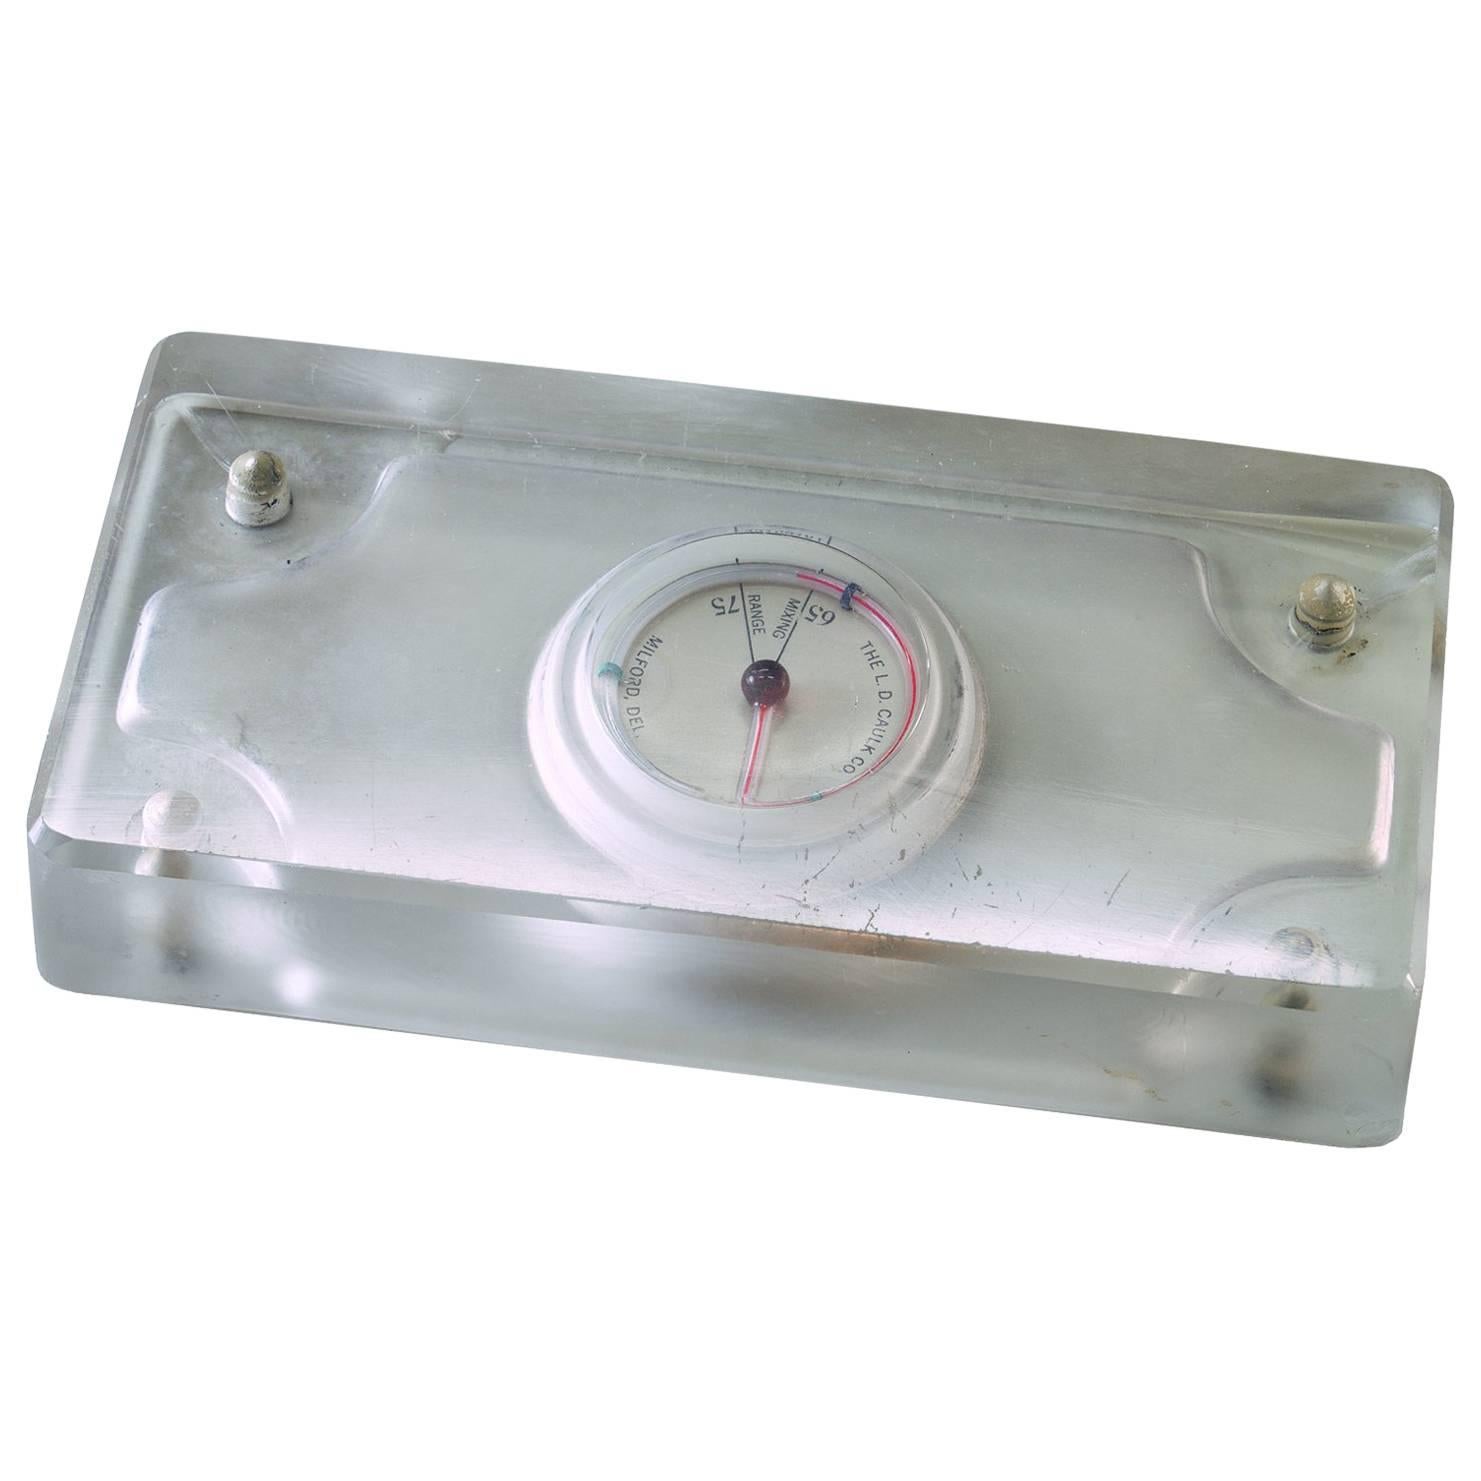 1920s Dental Paperweight Sculpture Glass Slab Temperature Gauge Thermometer